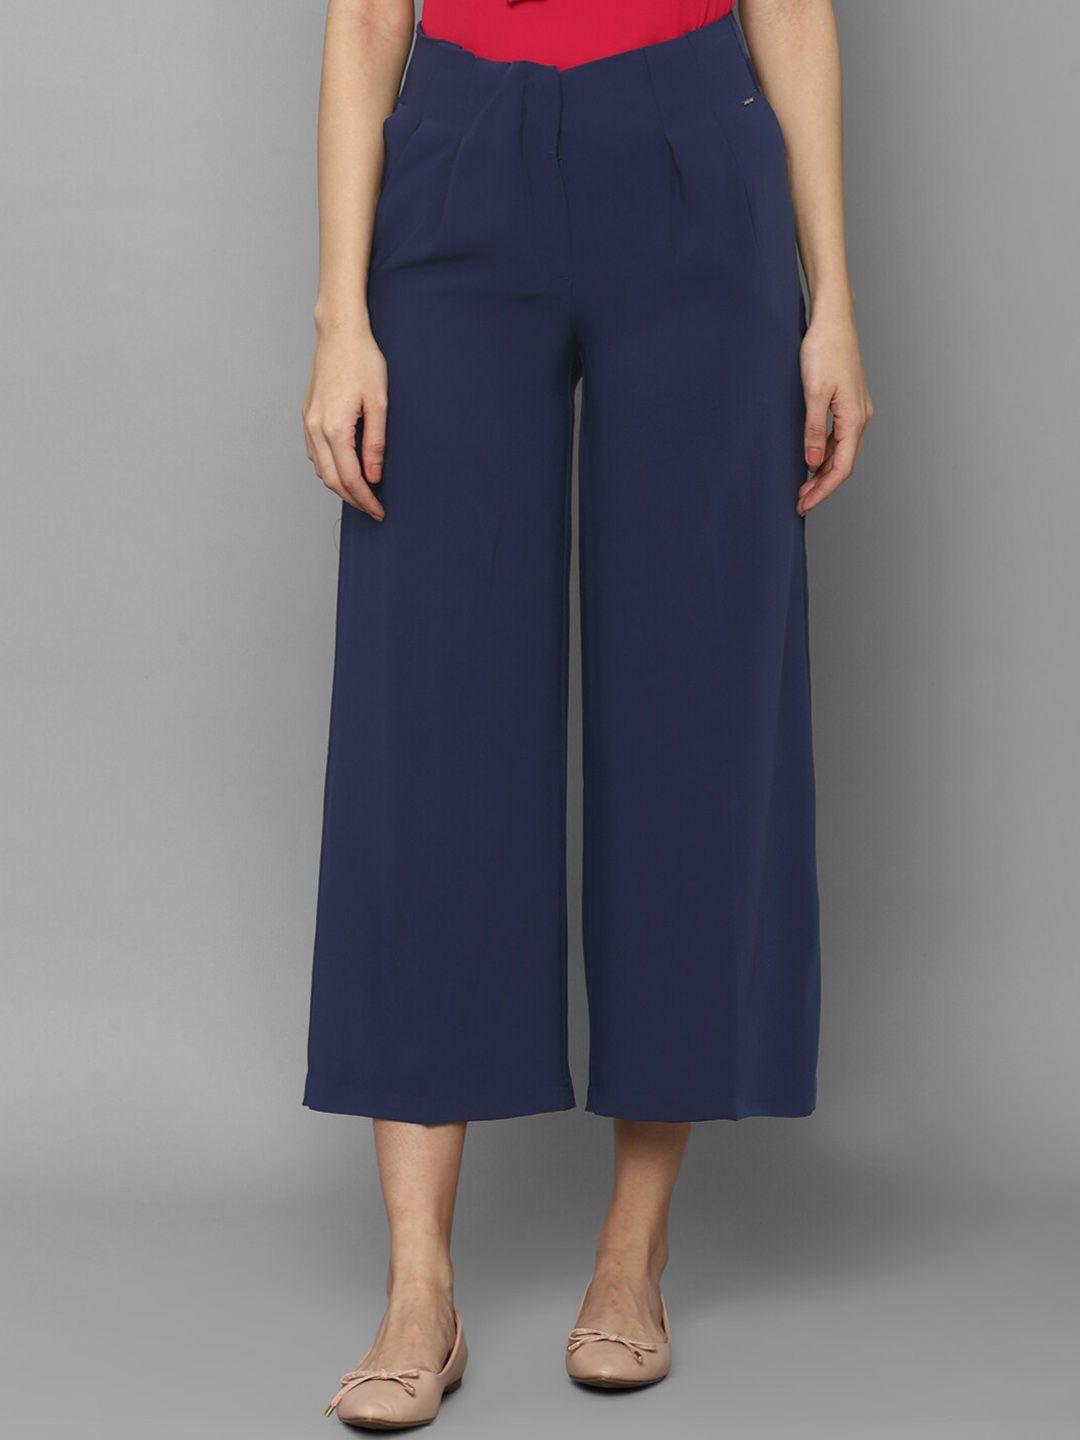 allen-solly-woman-women-navy-blue-pleated-culottes-trousers